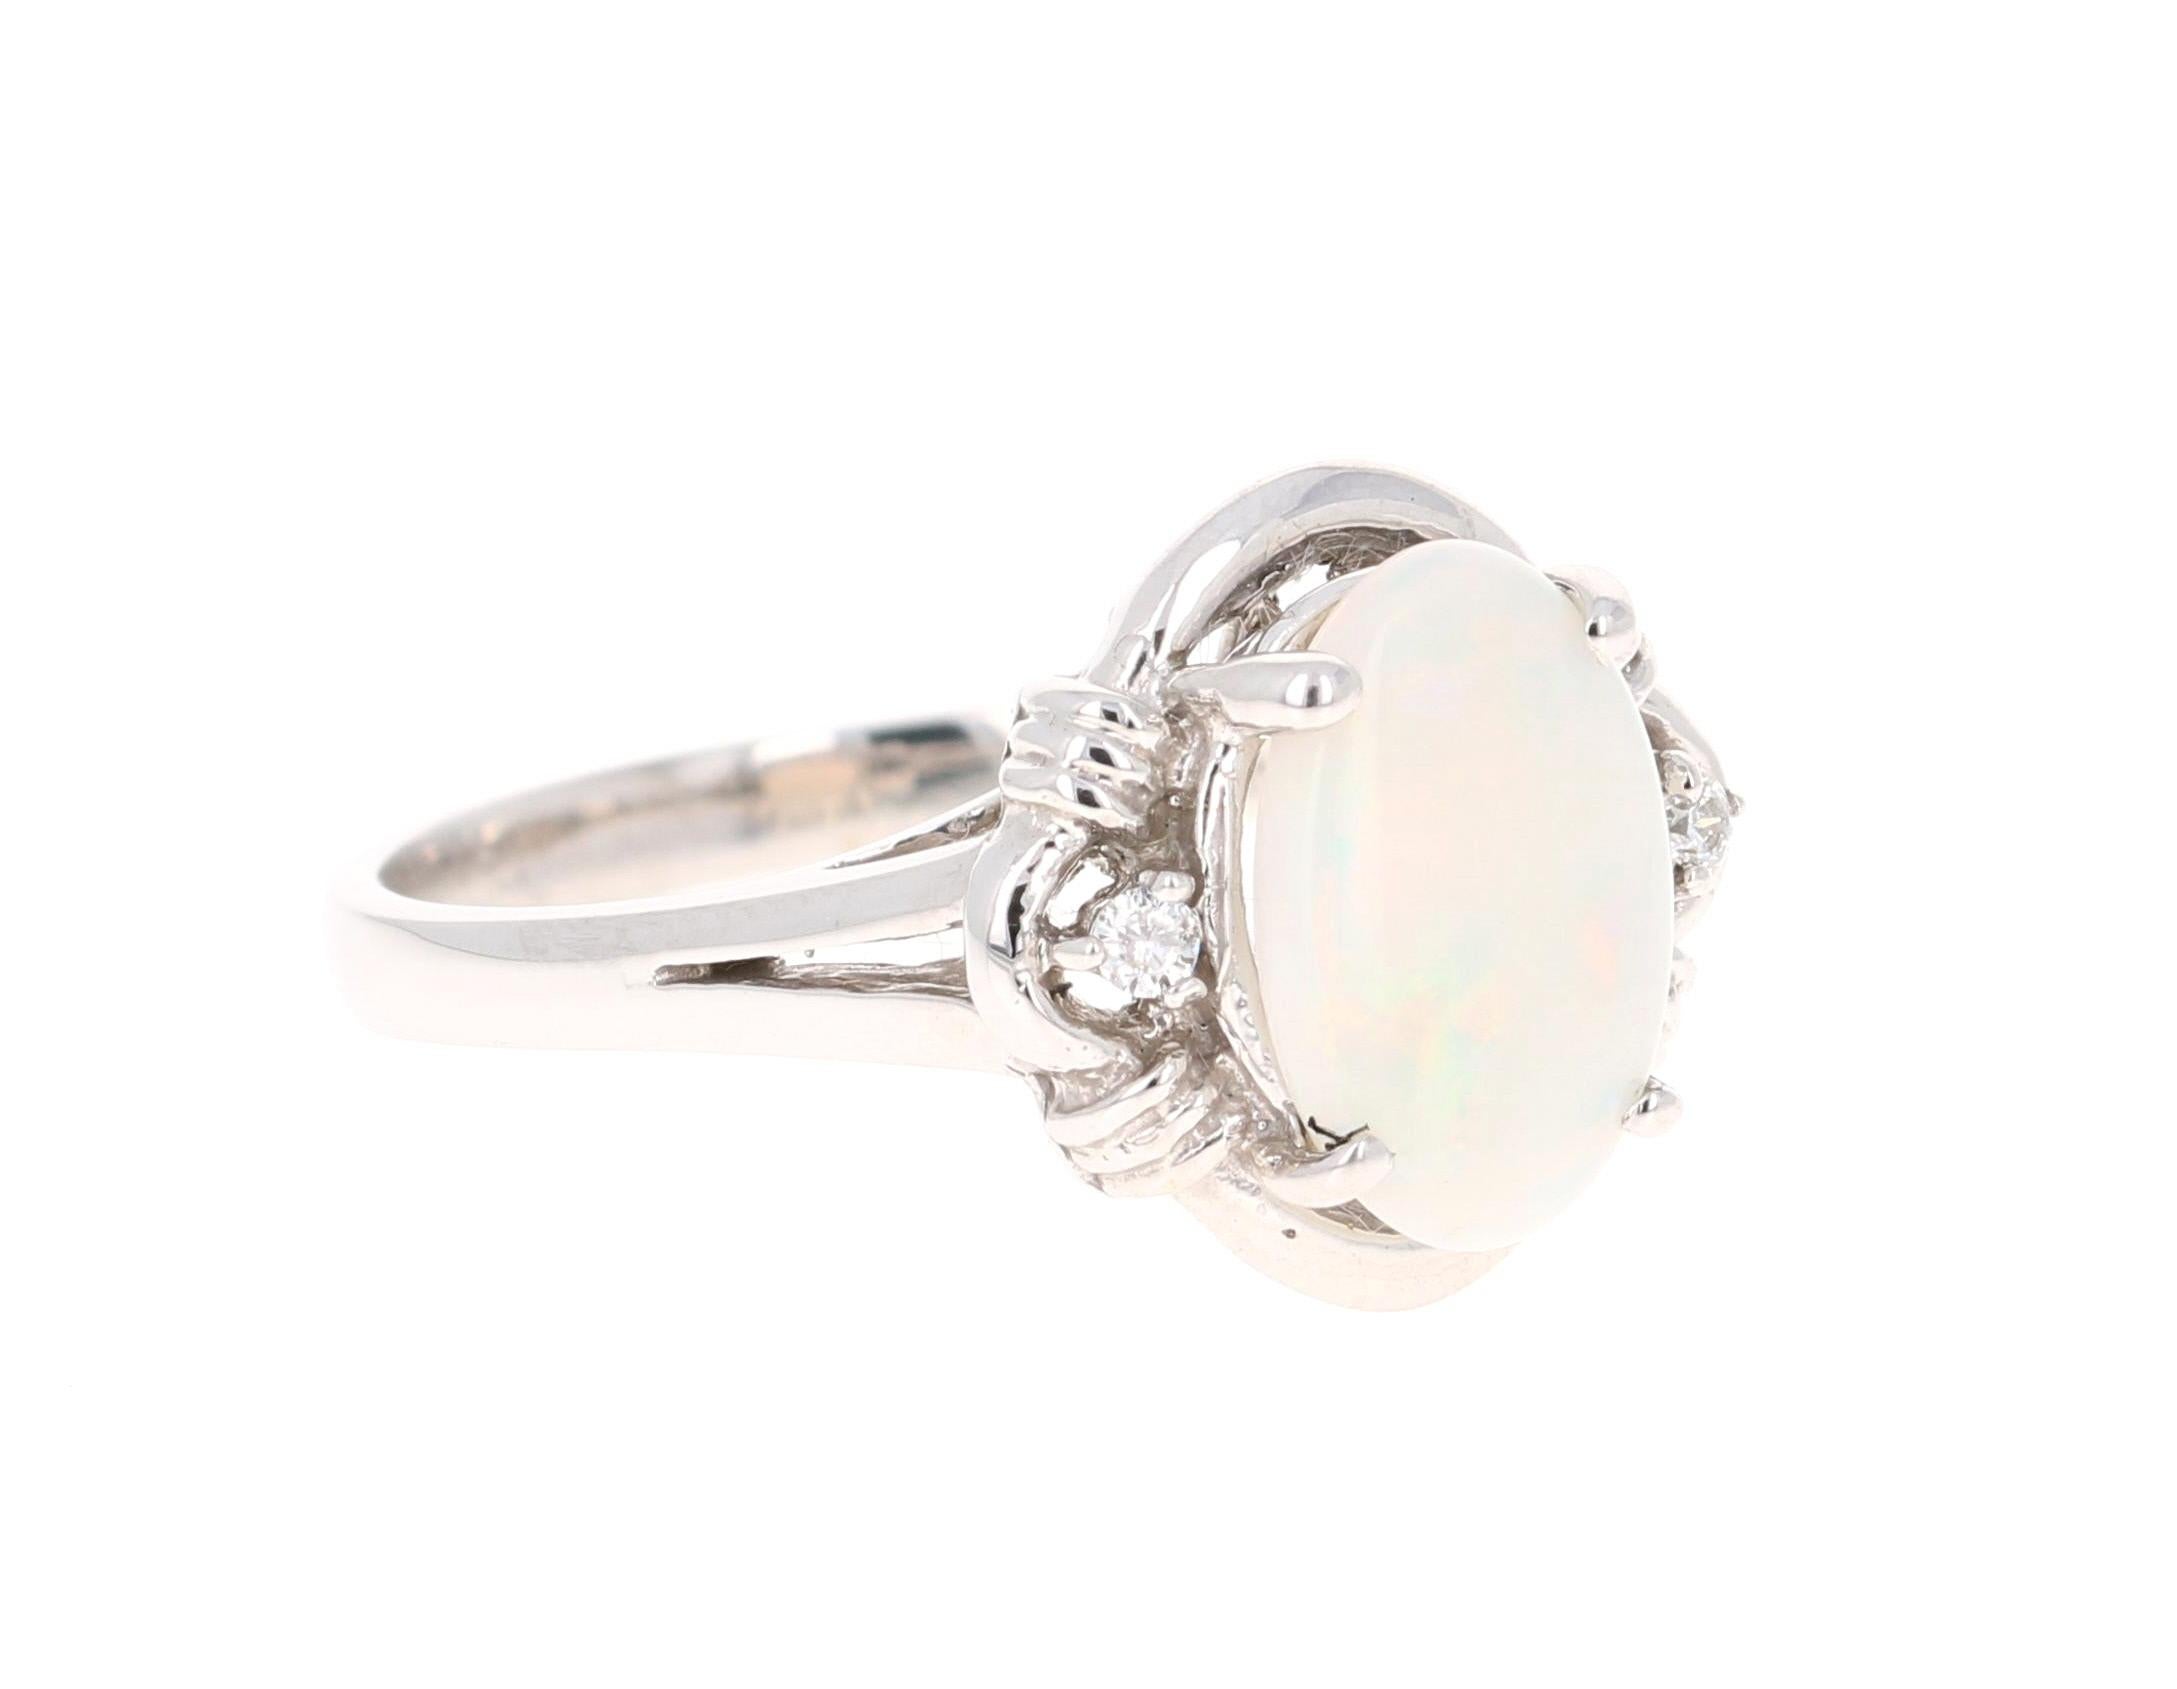 This ring has a cute and simple 0.93 Carat Opal and has 2 Round Cut Diamonds that weigh 0.04 Carats. The total carat weight of the ring is 0.97 Carats. 

The Opal displays beautiful flashes of yellow, green & orange and has its origins from